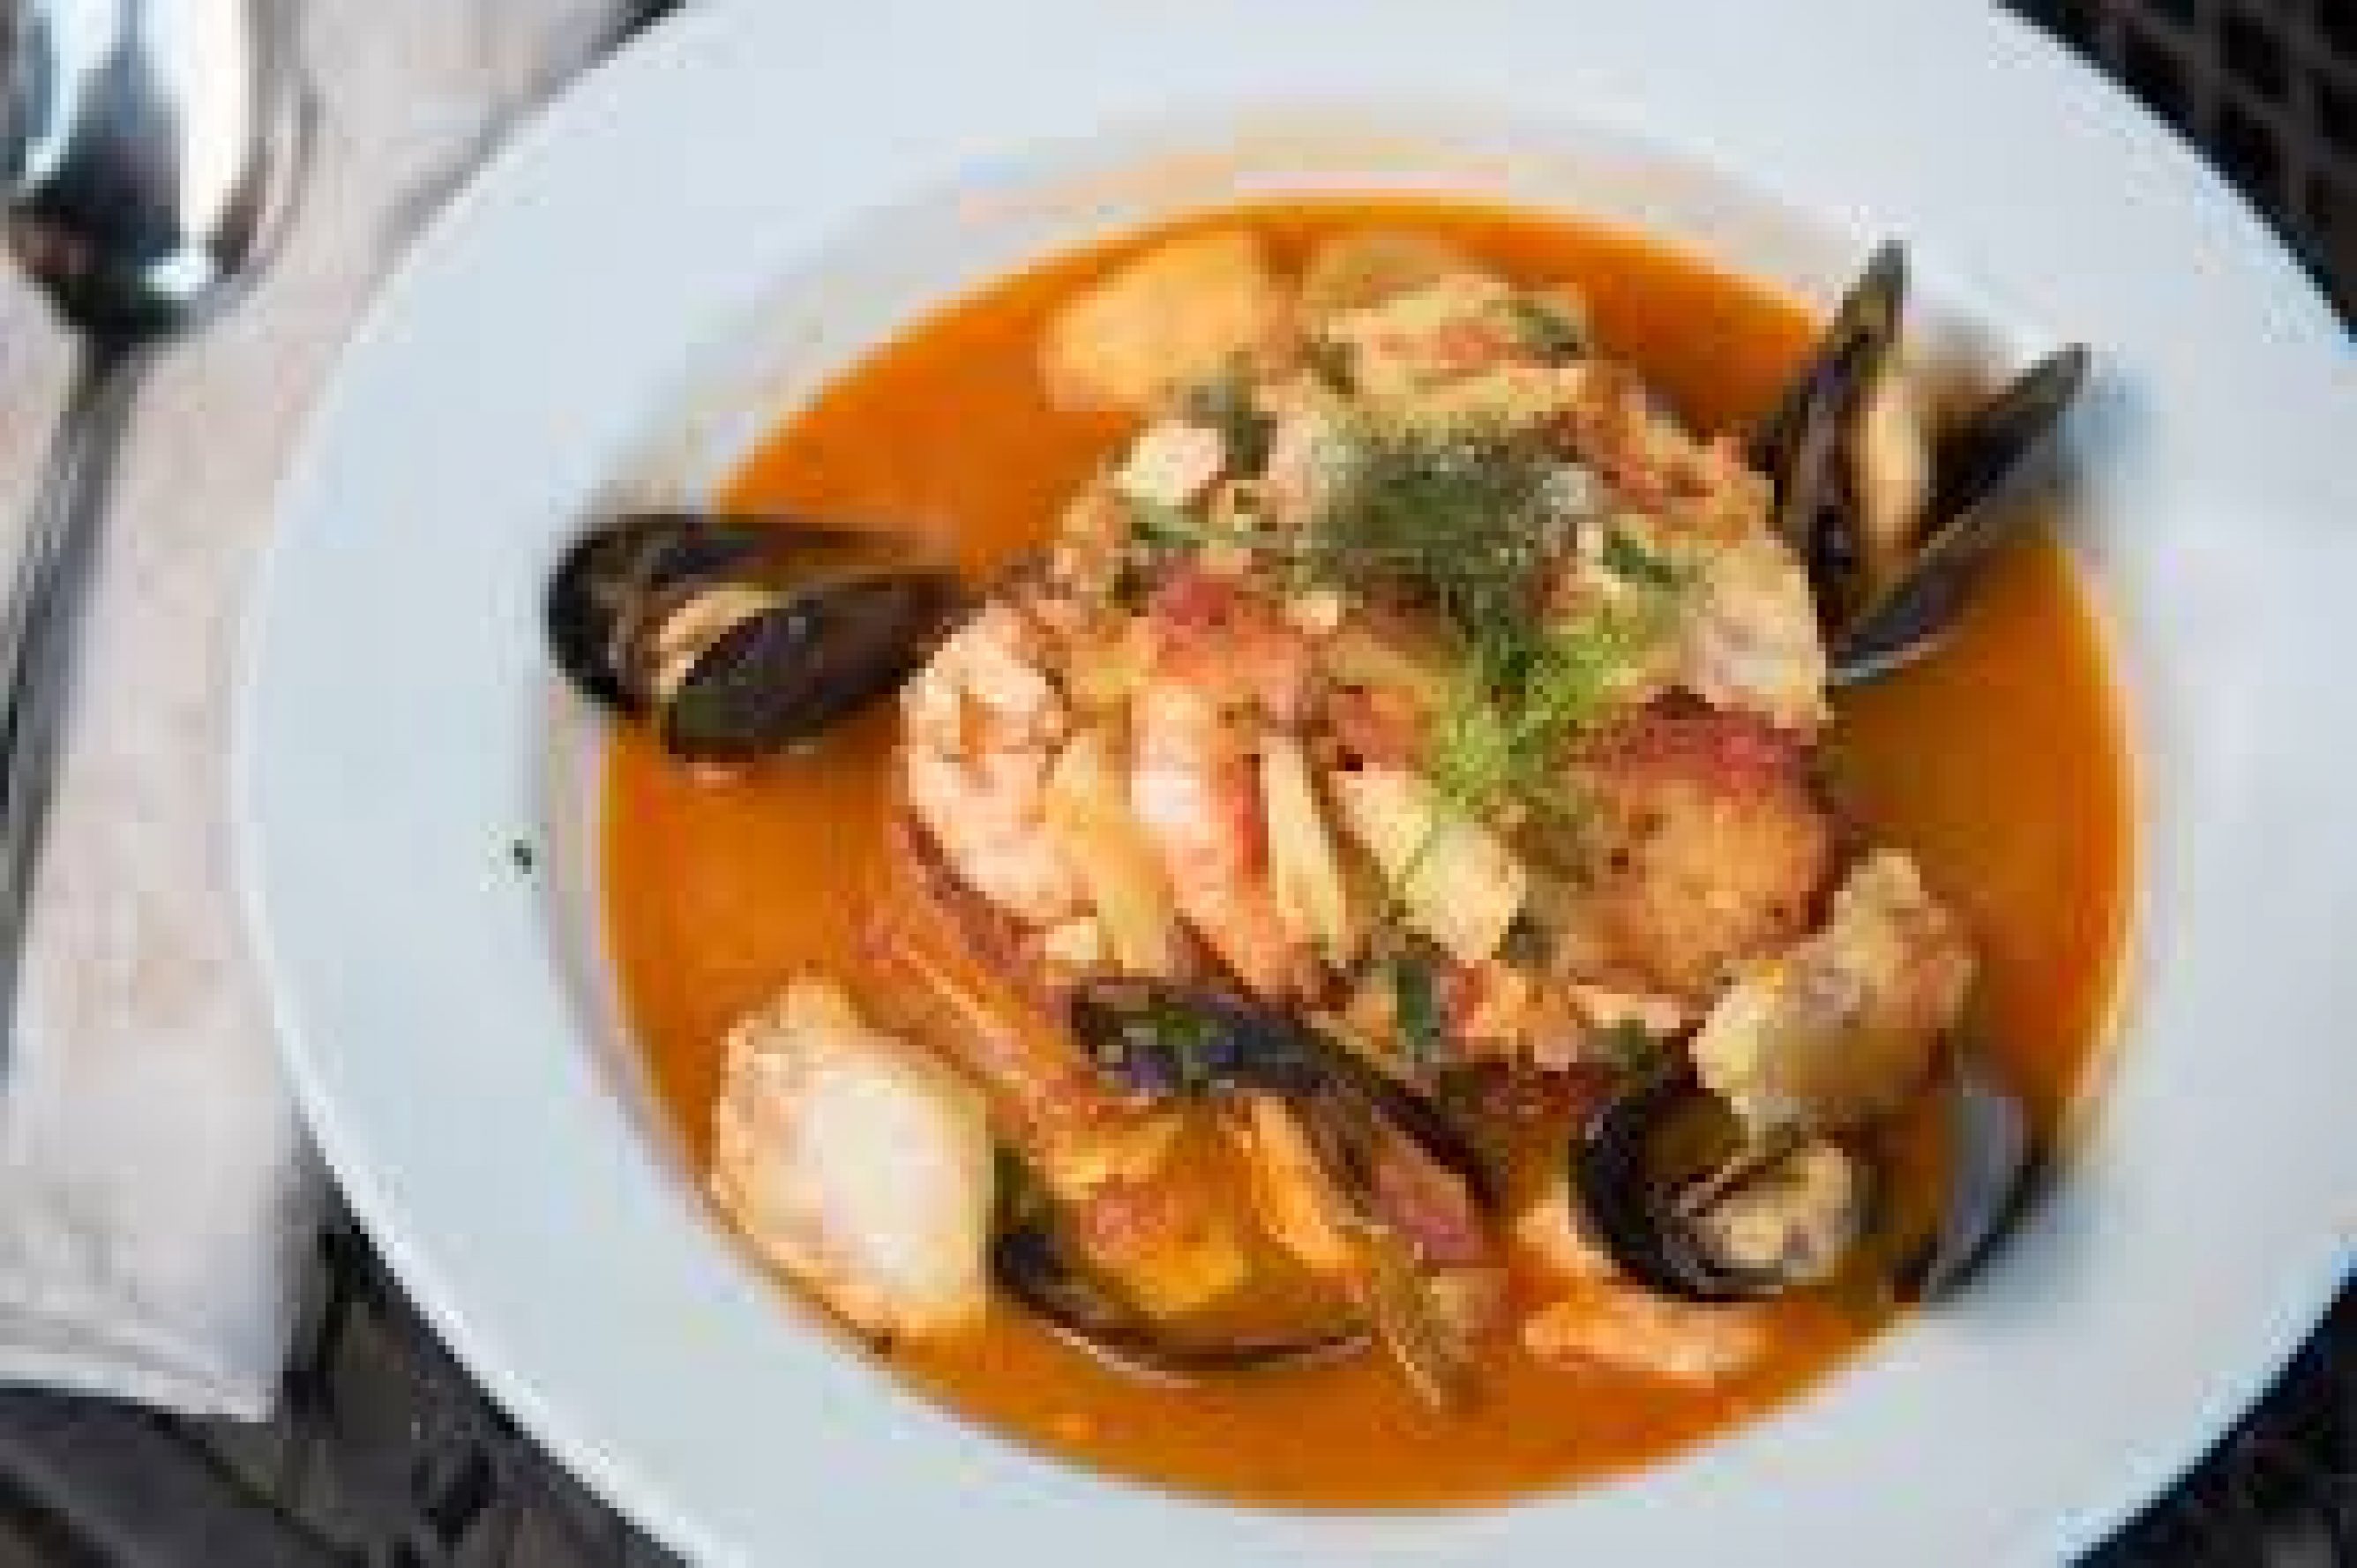 Bouillabaisse - The Great Midwest Seafood Company